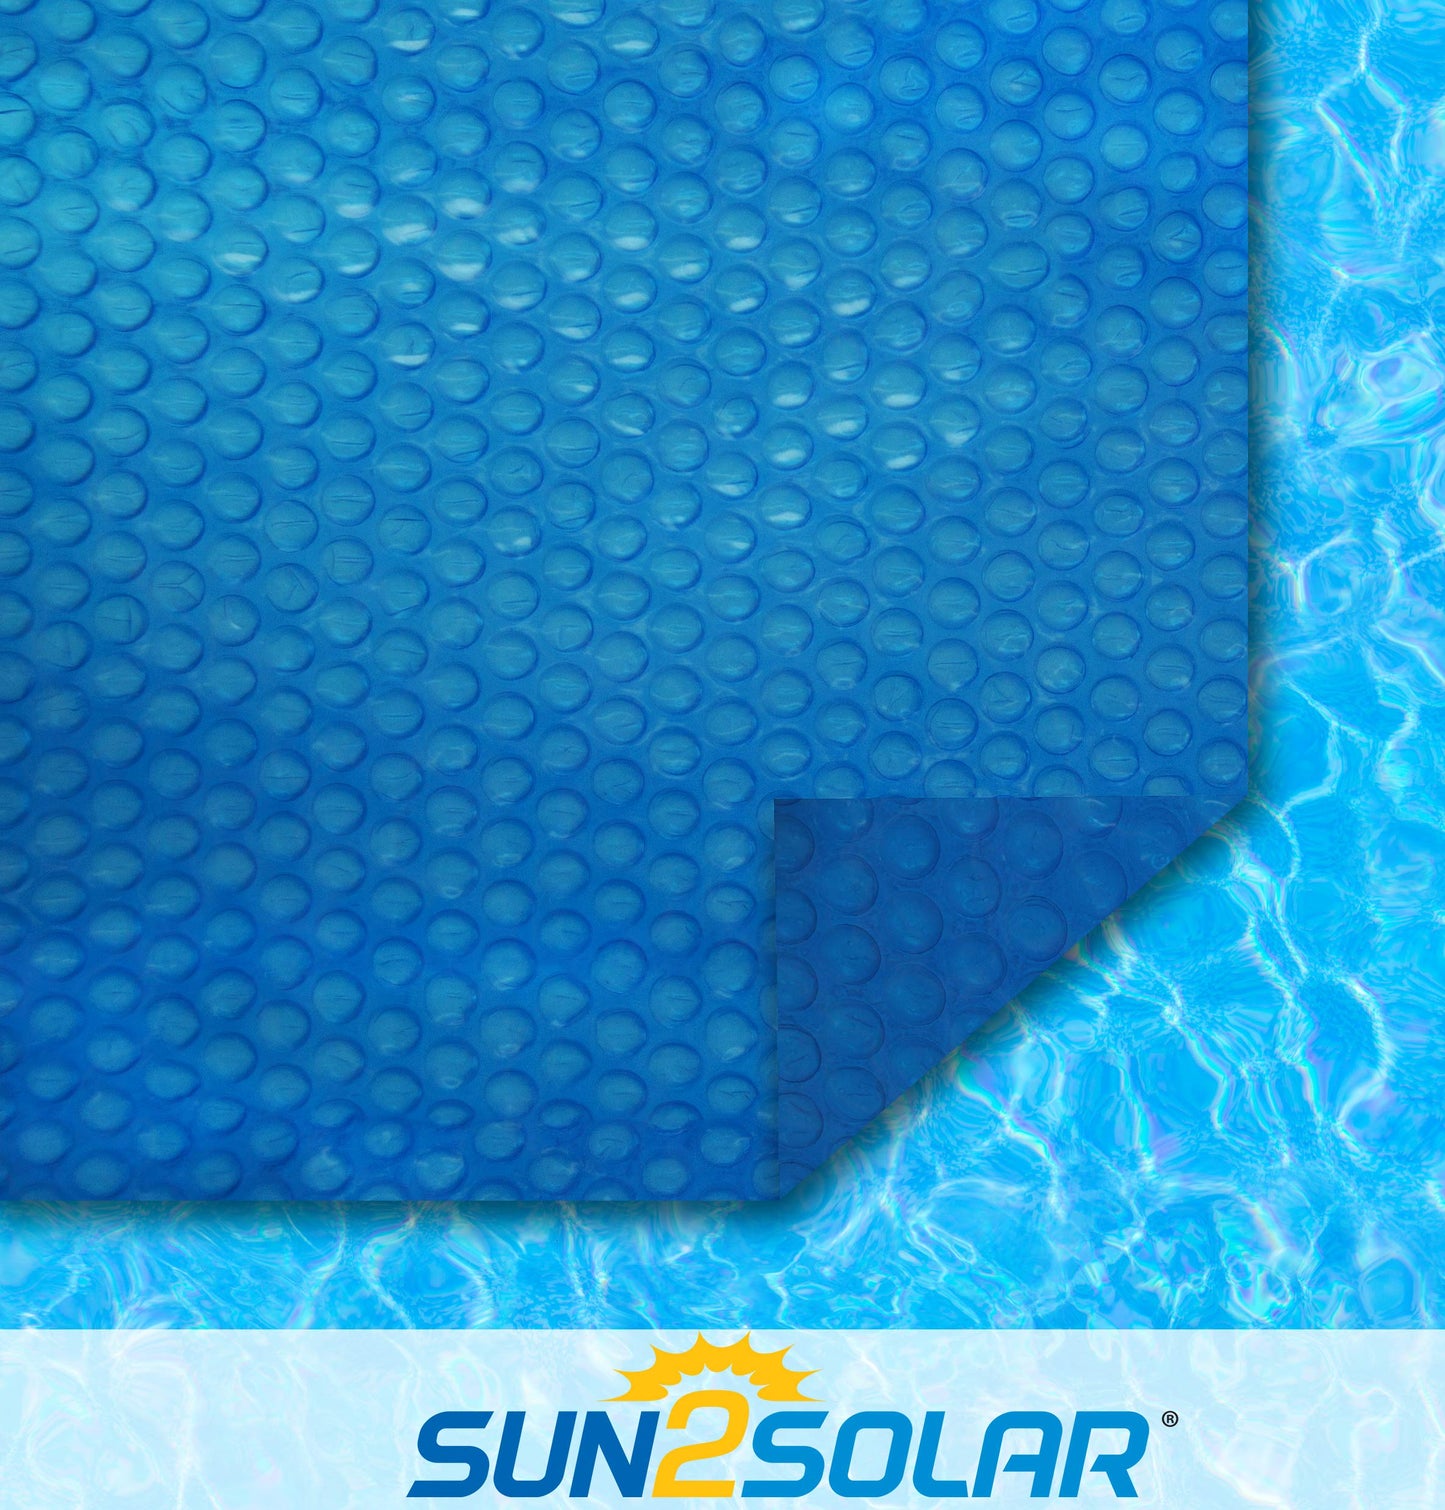 Sun2Solar Blue 21-Foot-by-41-Foot Oval Solar Cover | 1200 Series